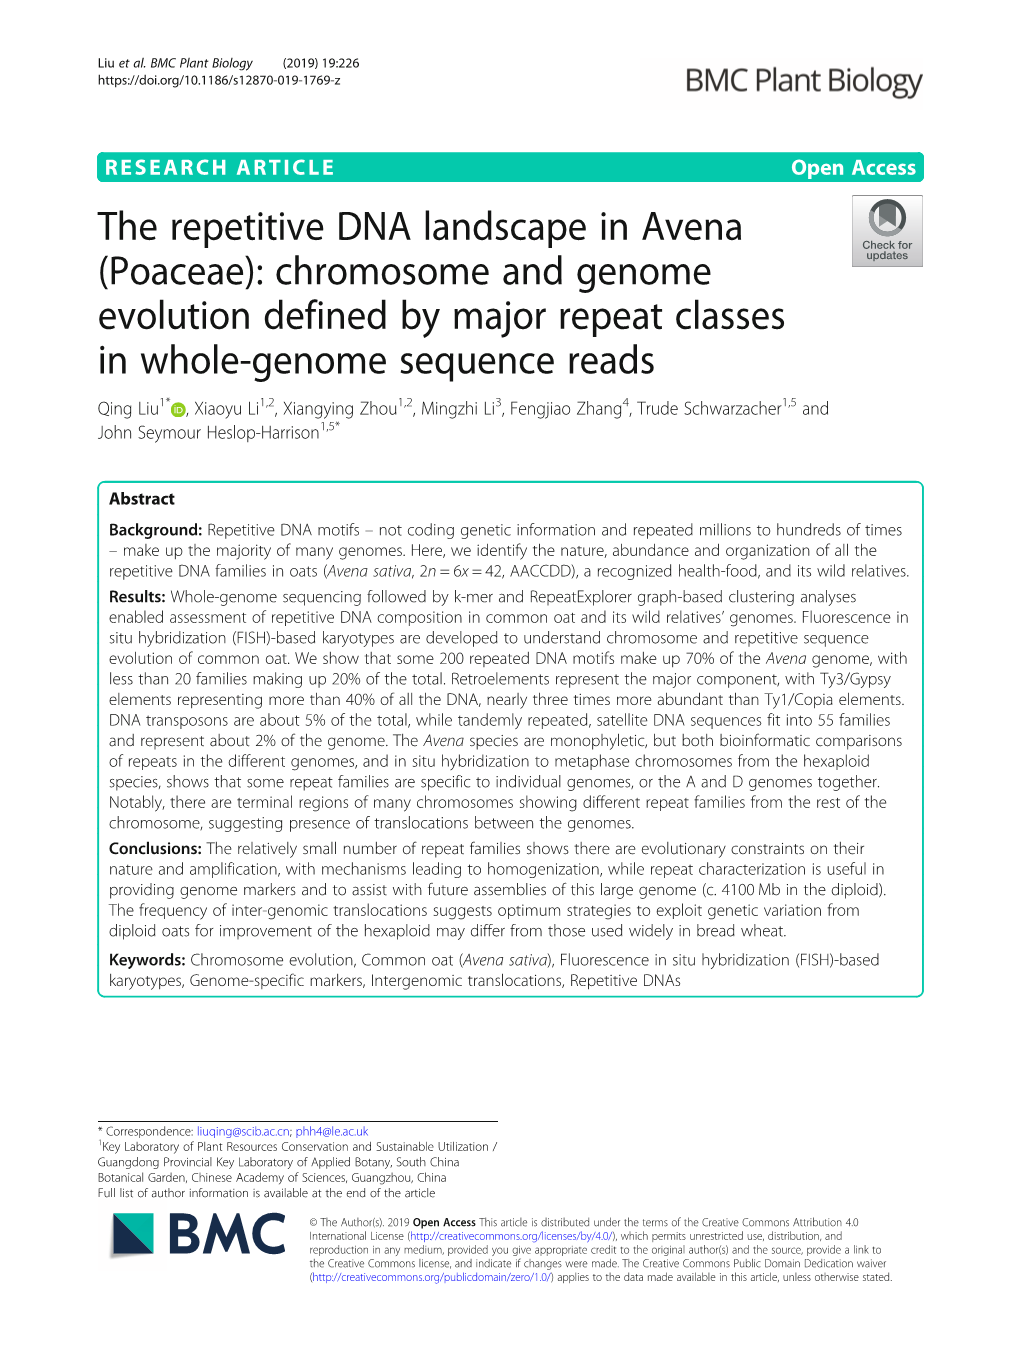 The Repetitive DNA Landscape in Avena (Poaceae): Chromosome